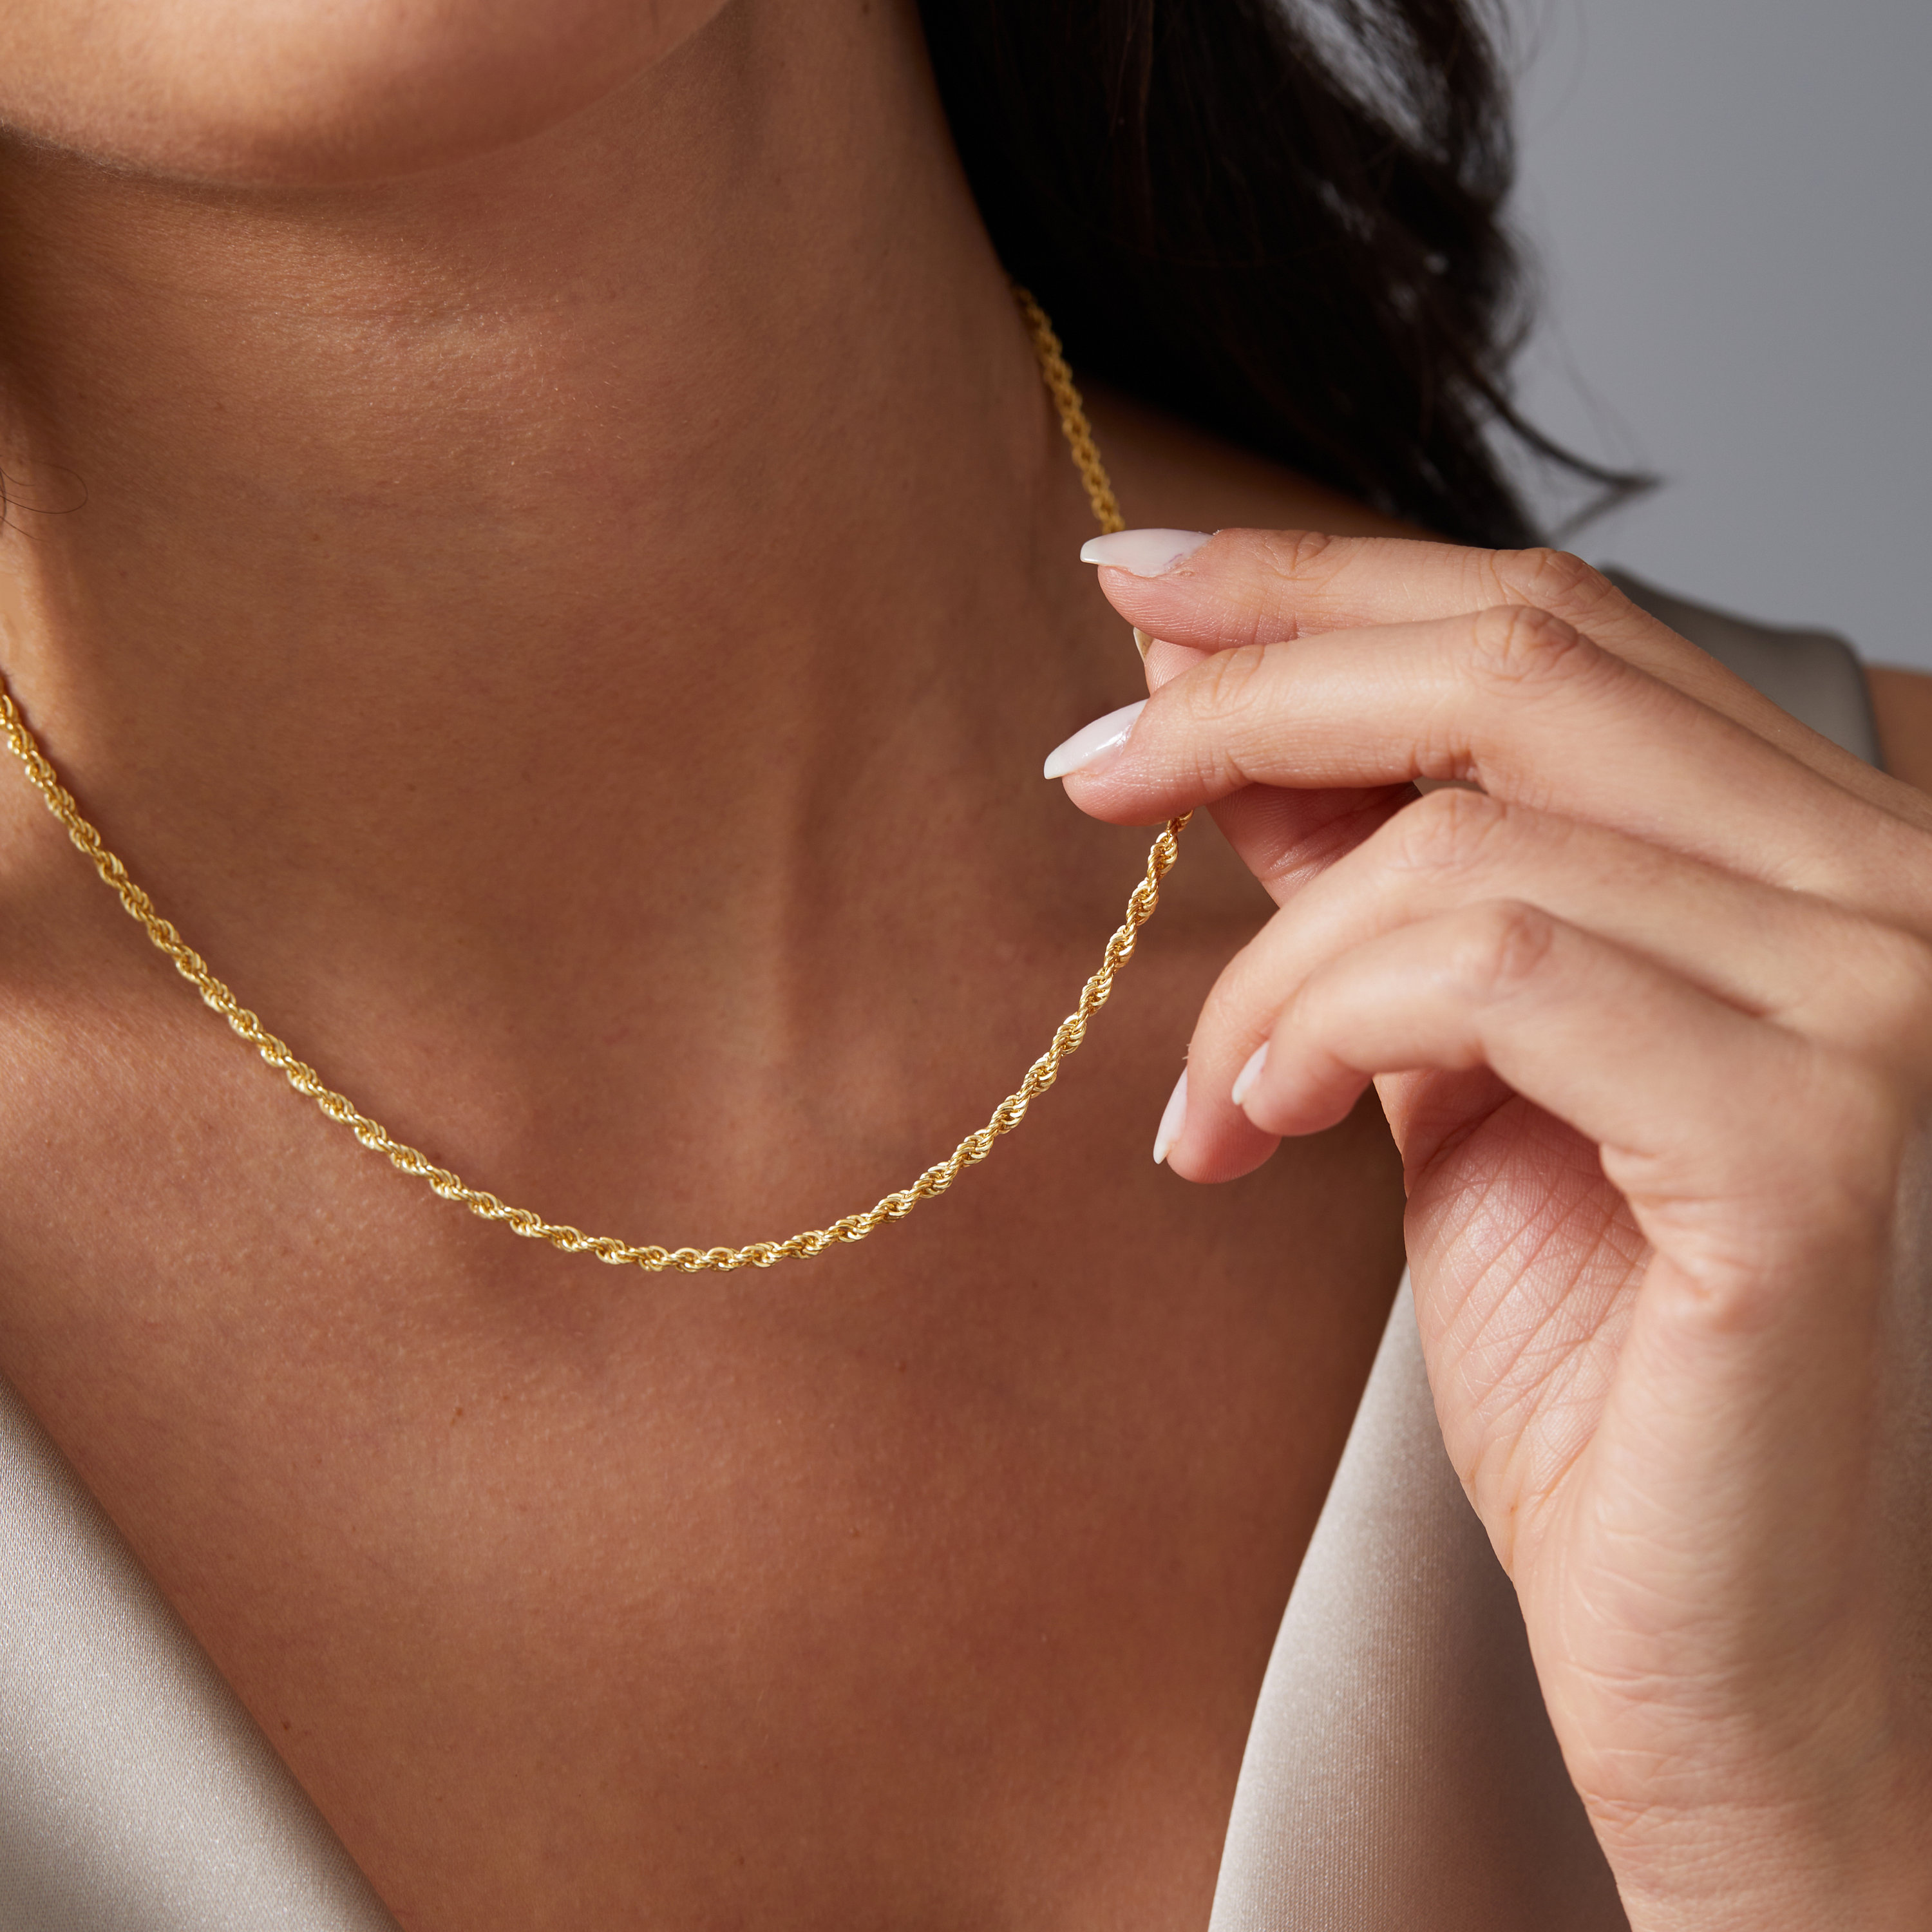 14k Gold Rope Chain Necklace, Layering Necklace, Thick Rope Chain Necklace,  925k Silver Rope Chain Necklace, Simple Gold Chain for Women